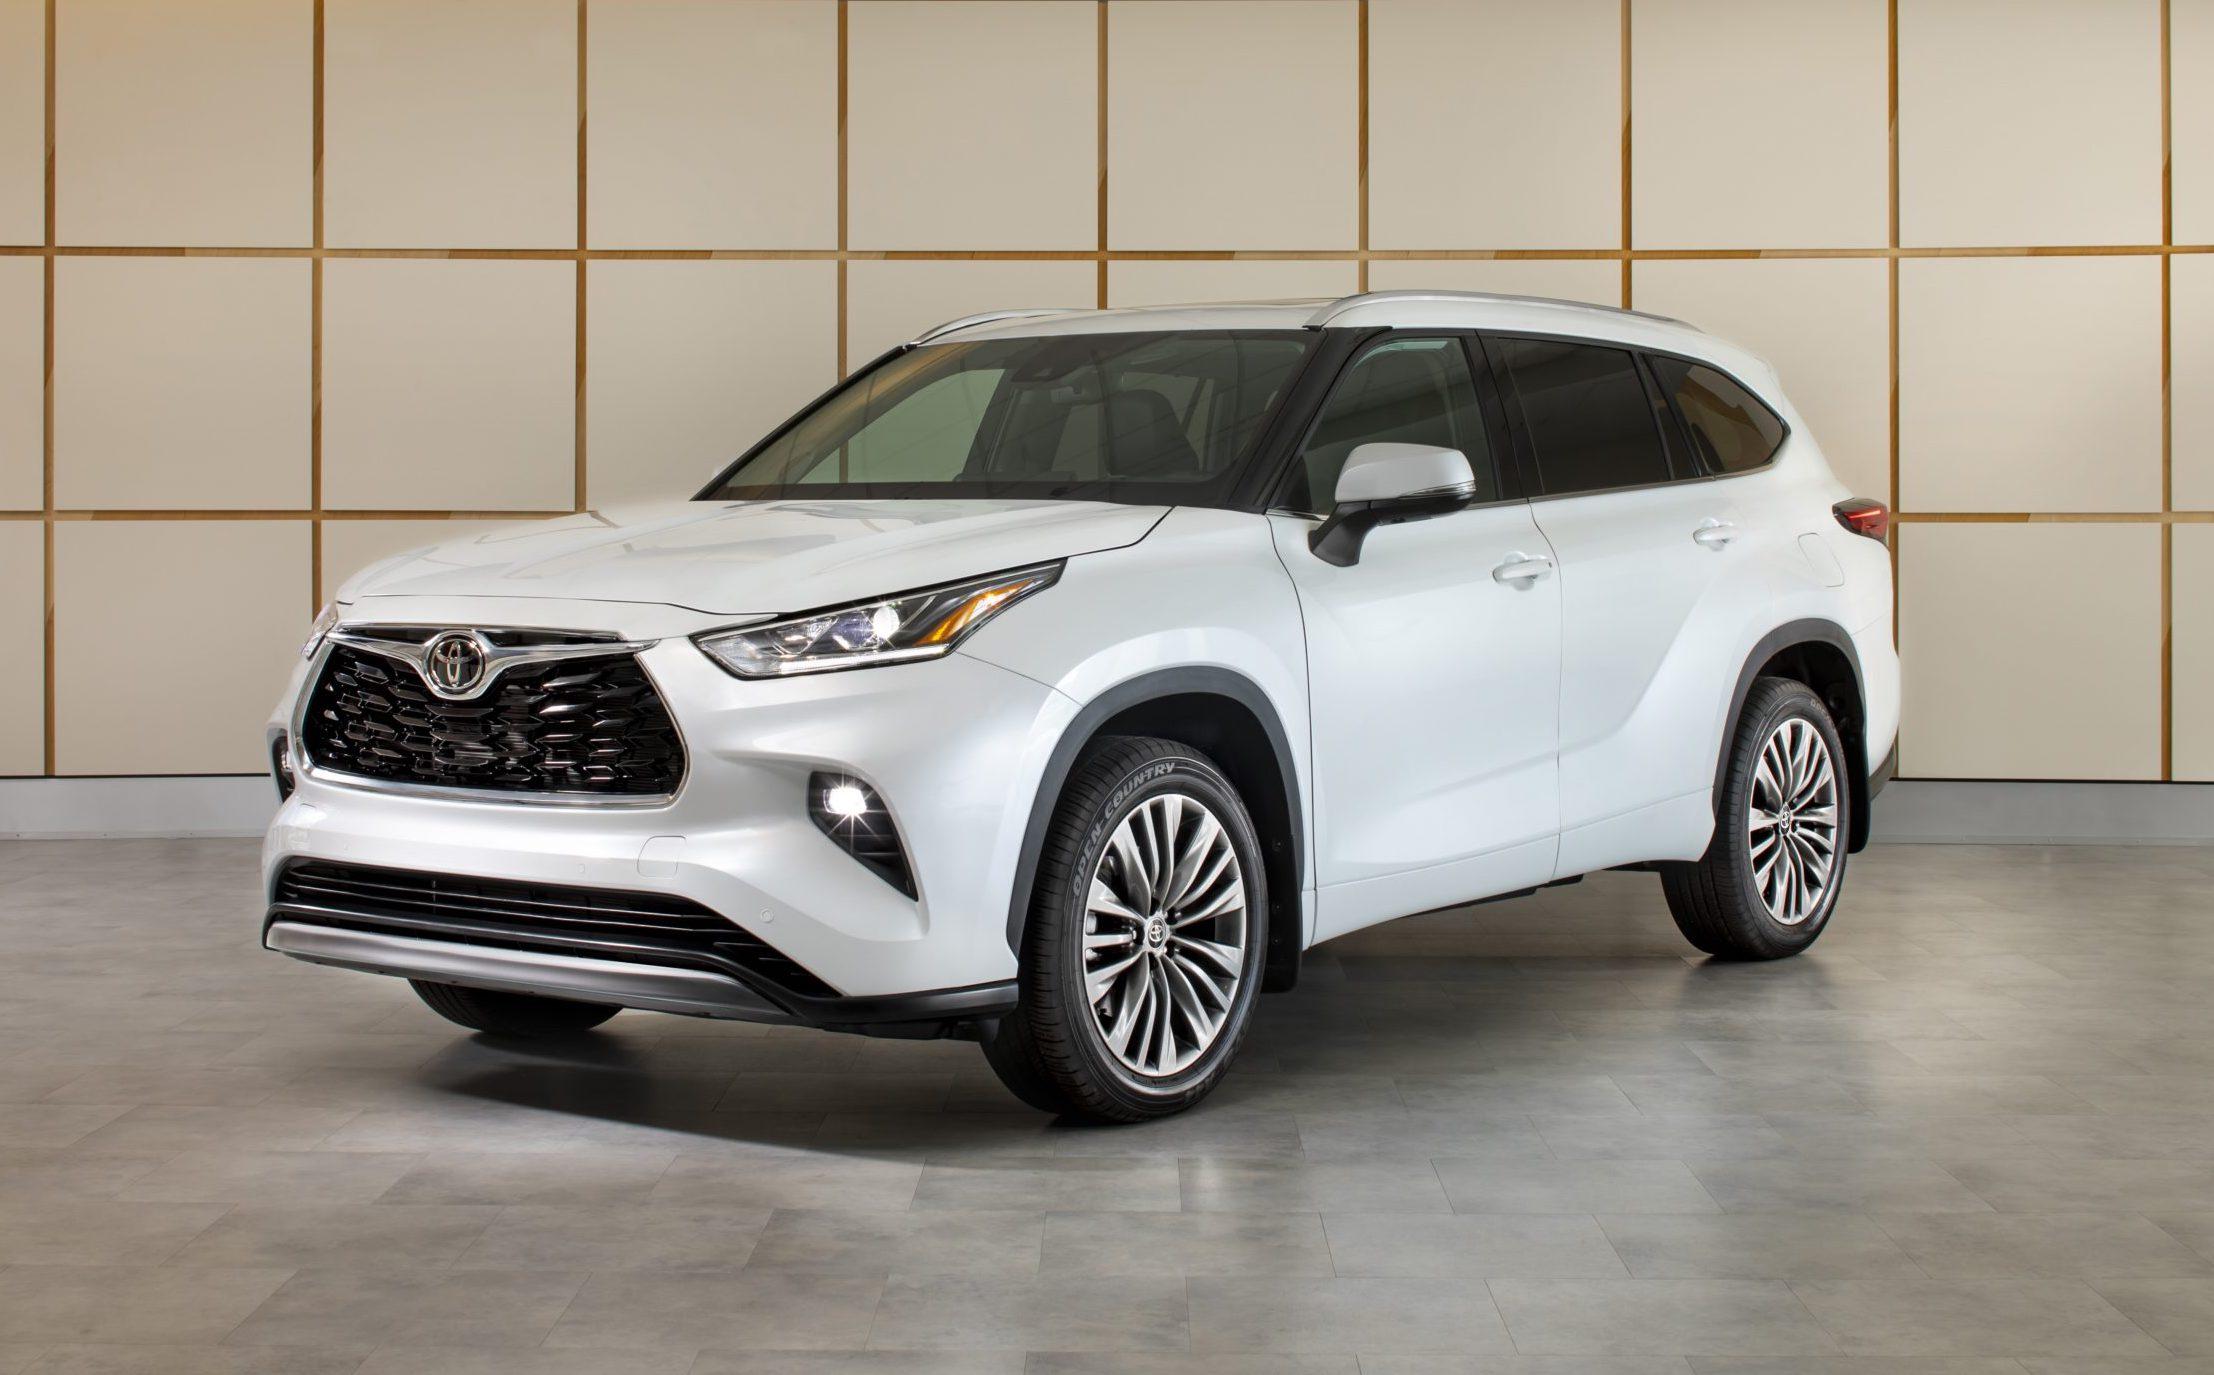 2023 Toyota Kluger Turbo engine pricing and updates detailed CarExpert